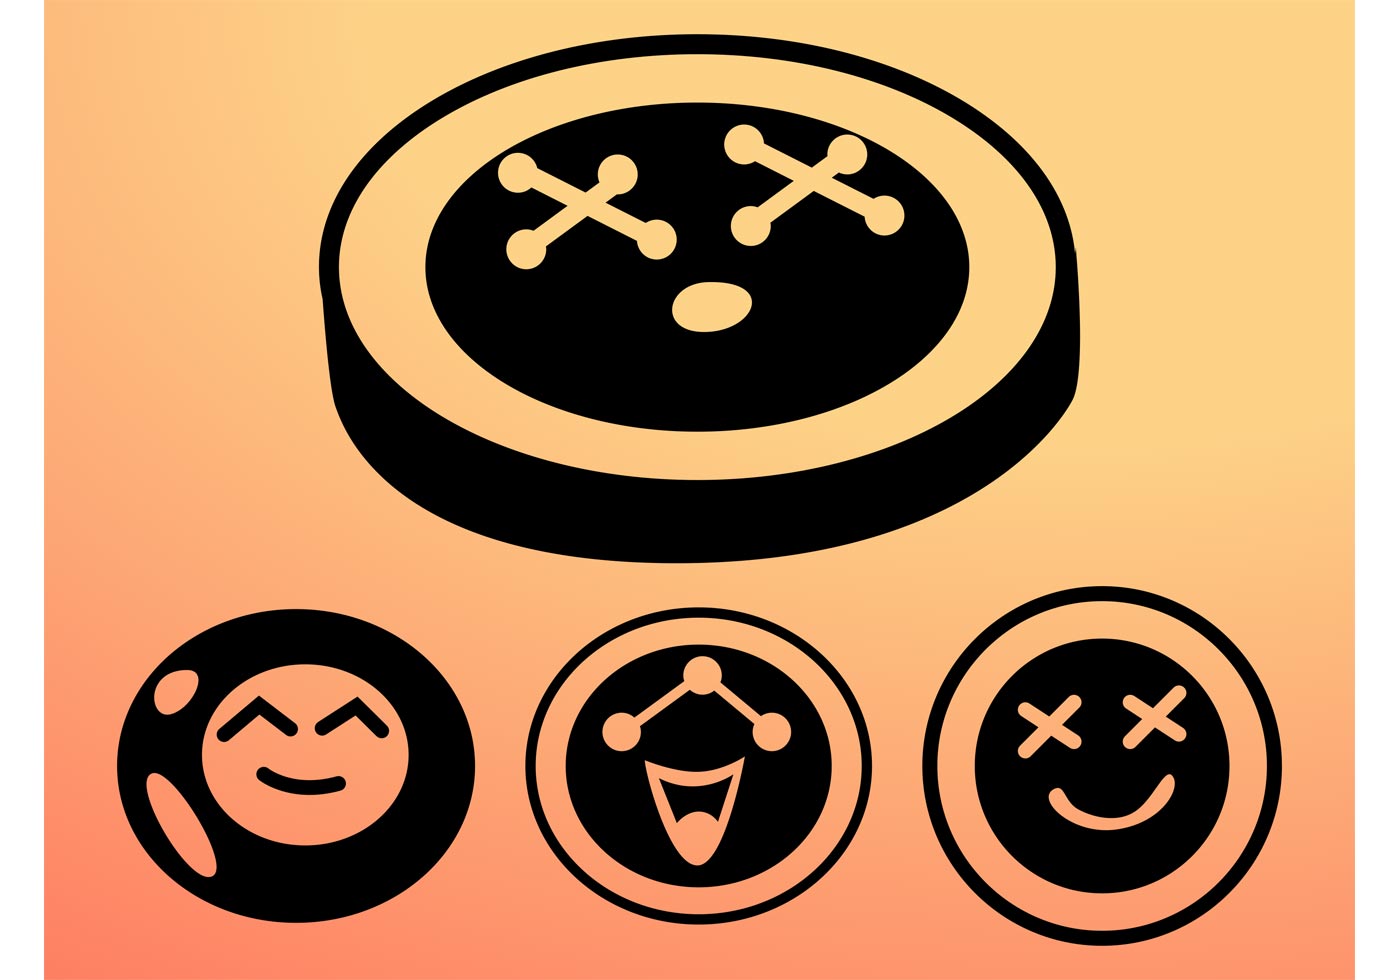 Crazy Emoticons - Download Free Vector Art, Stock Graphics & Images